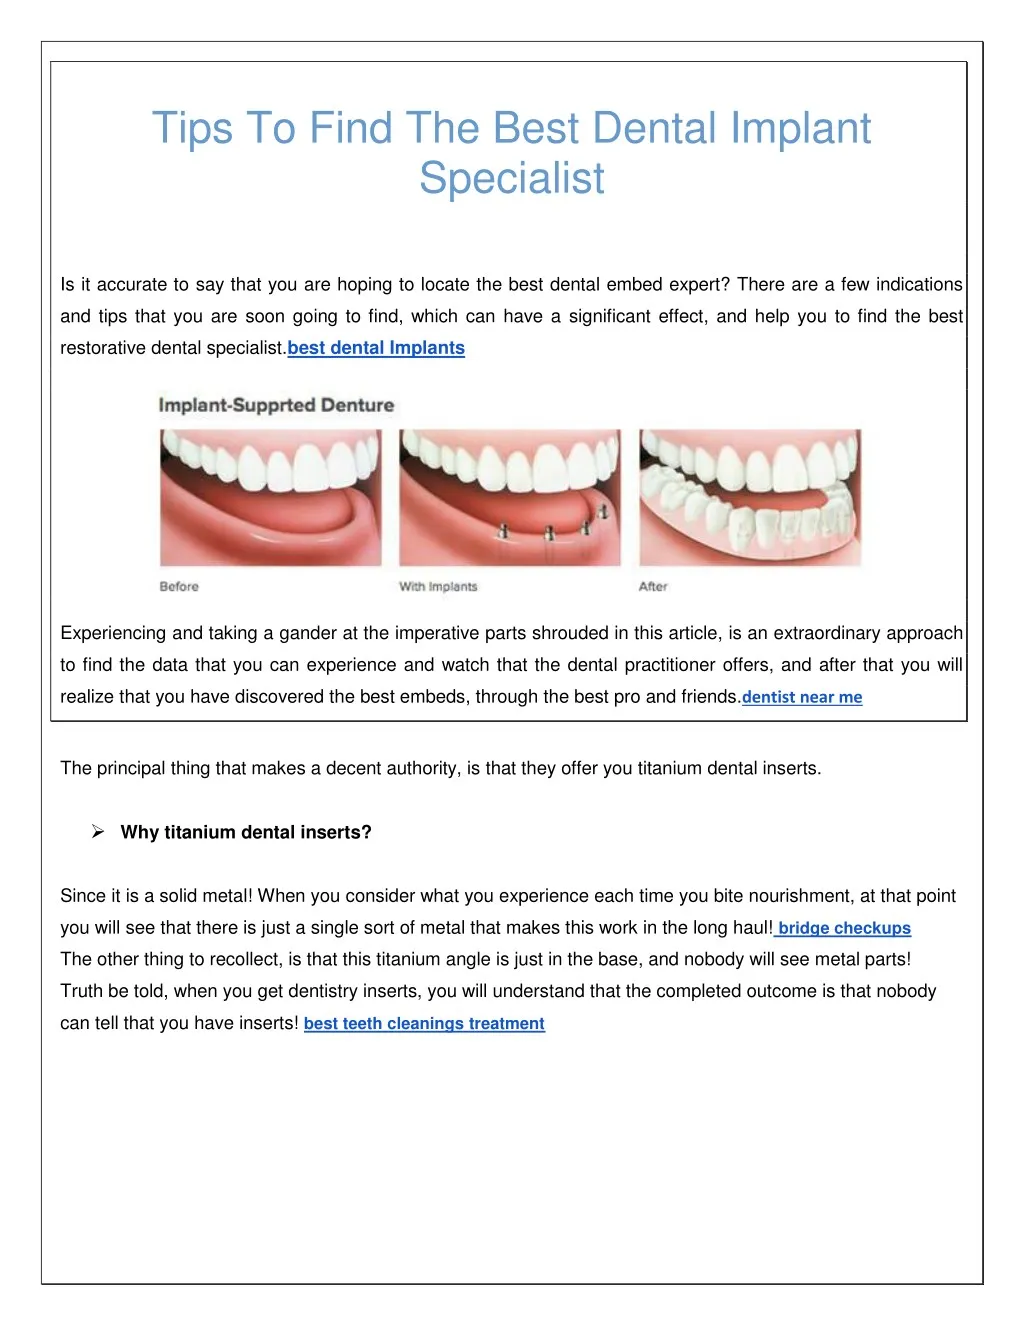 tips to find the best dental implant specialist